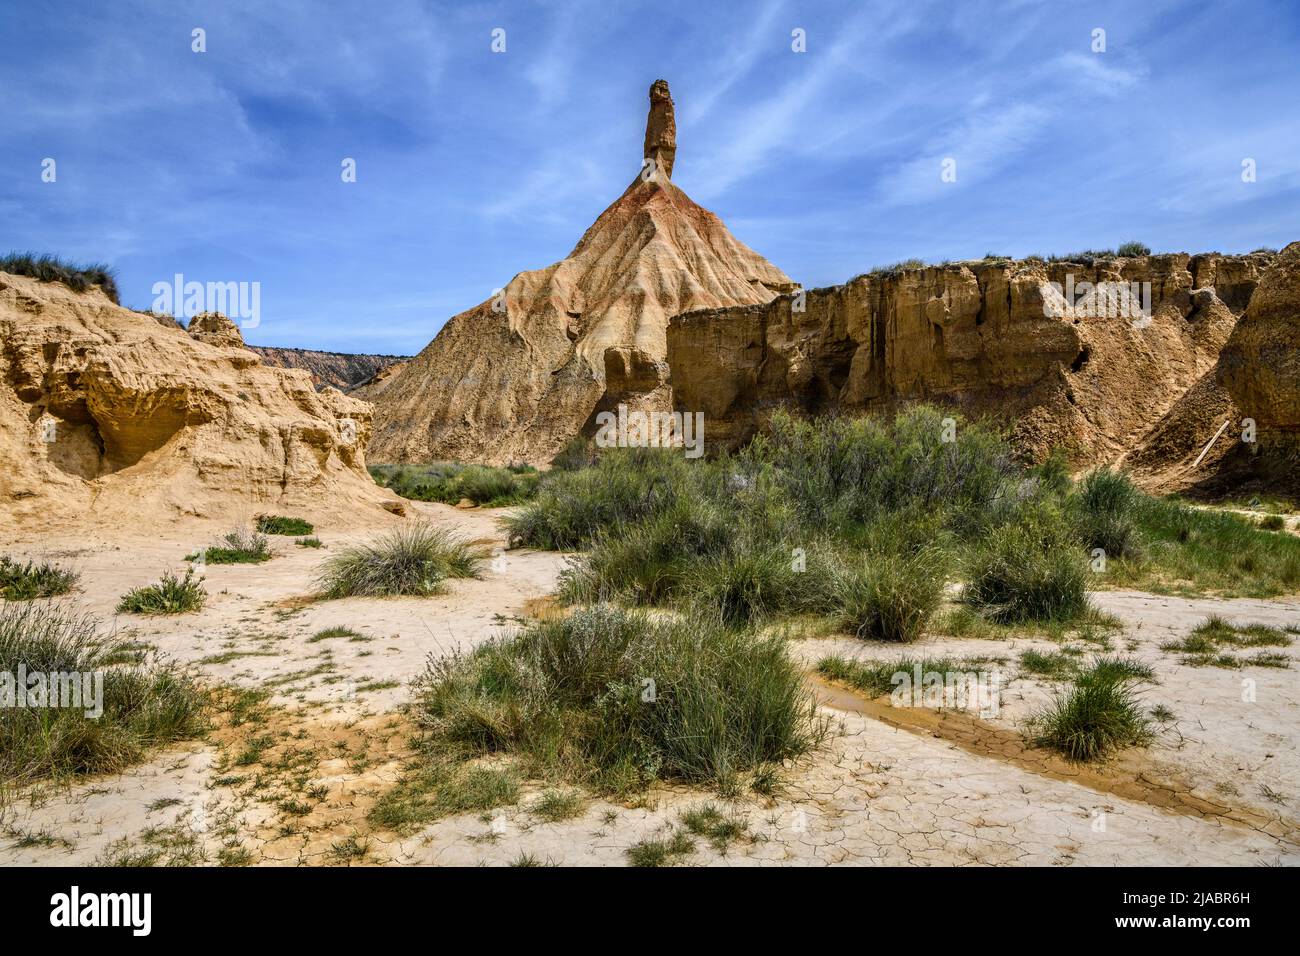 View of the castildetierra, the most famous geological formation in the Bardenas Reales desert, a spring day, with some vegetation. Stock Photo